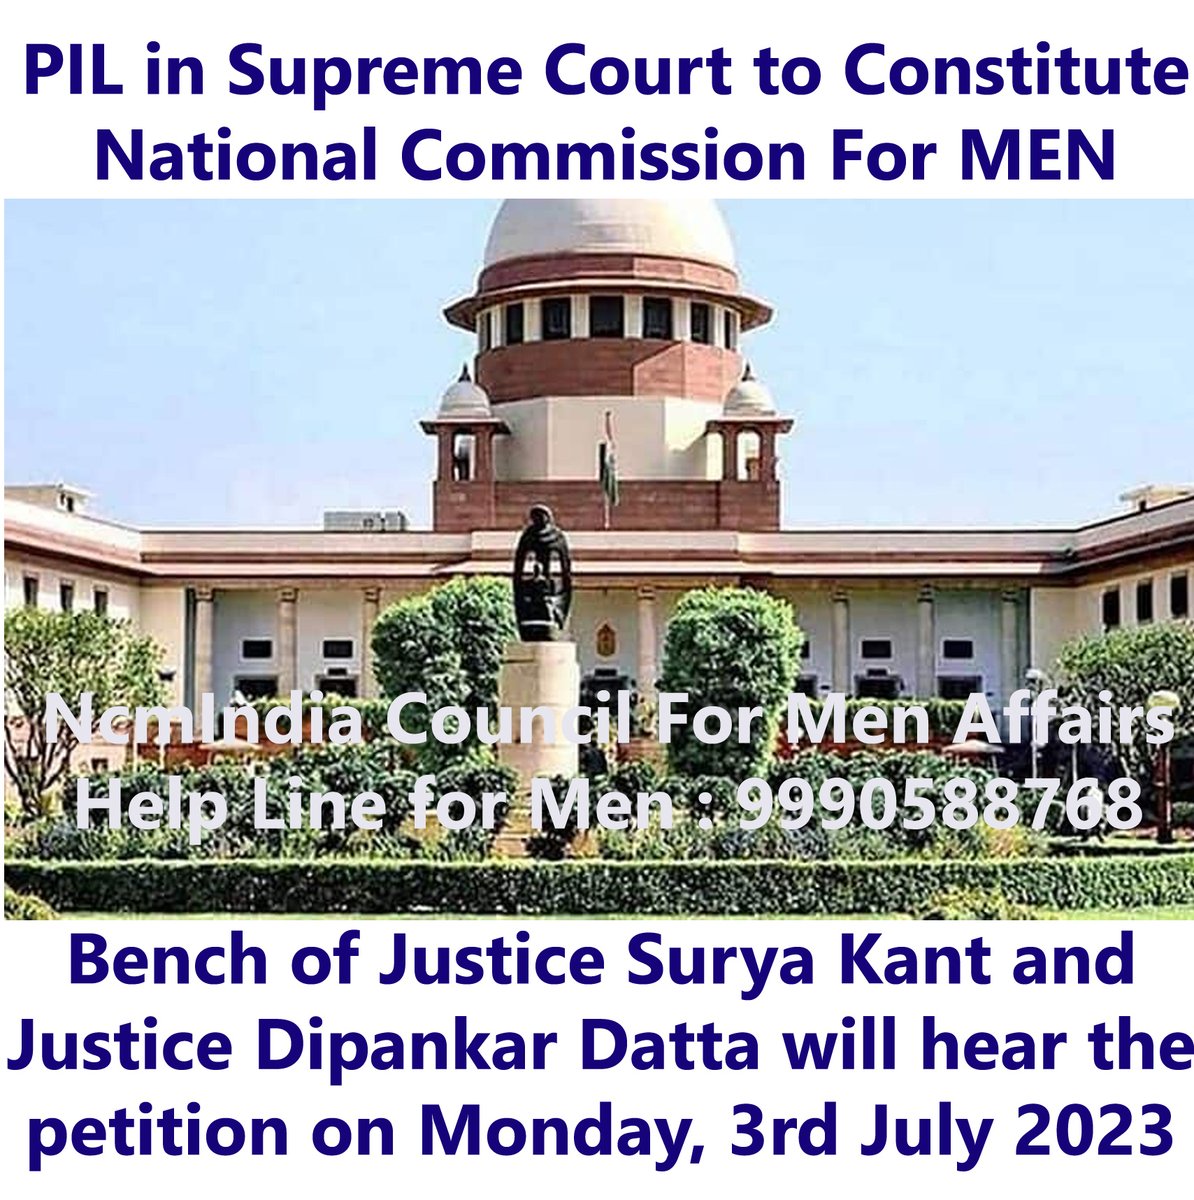 #PurushAayog #UniformCivilCode 
A PIL has been filled in the Supreme Court to issue direction to the Central Govt to constitute National Commission For Men to safeguard the interests of Male Victims of #DomesticViolence and address the issue of growing number of suicides by